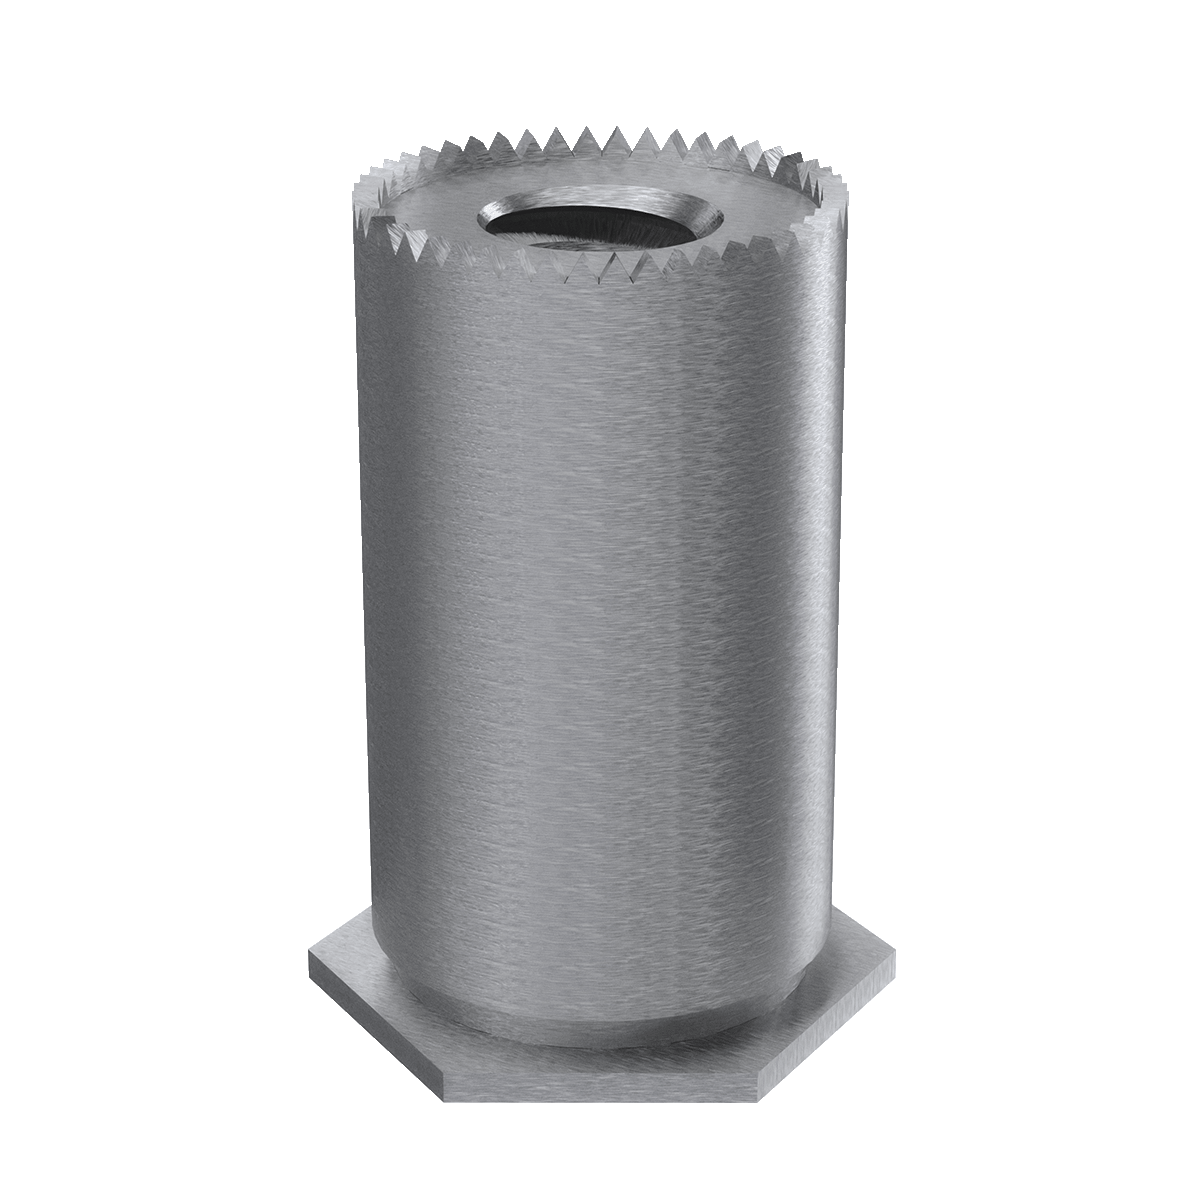 Self-Clinching Standoff, Self-Grounding, 300 Series Stainless Steel, Passivated, 4-40 x 0.312, 100 Pack